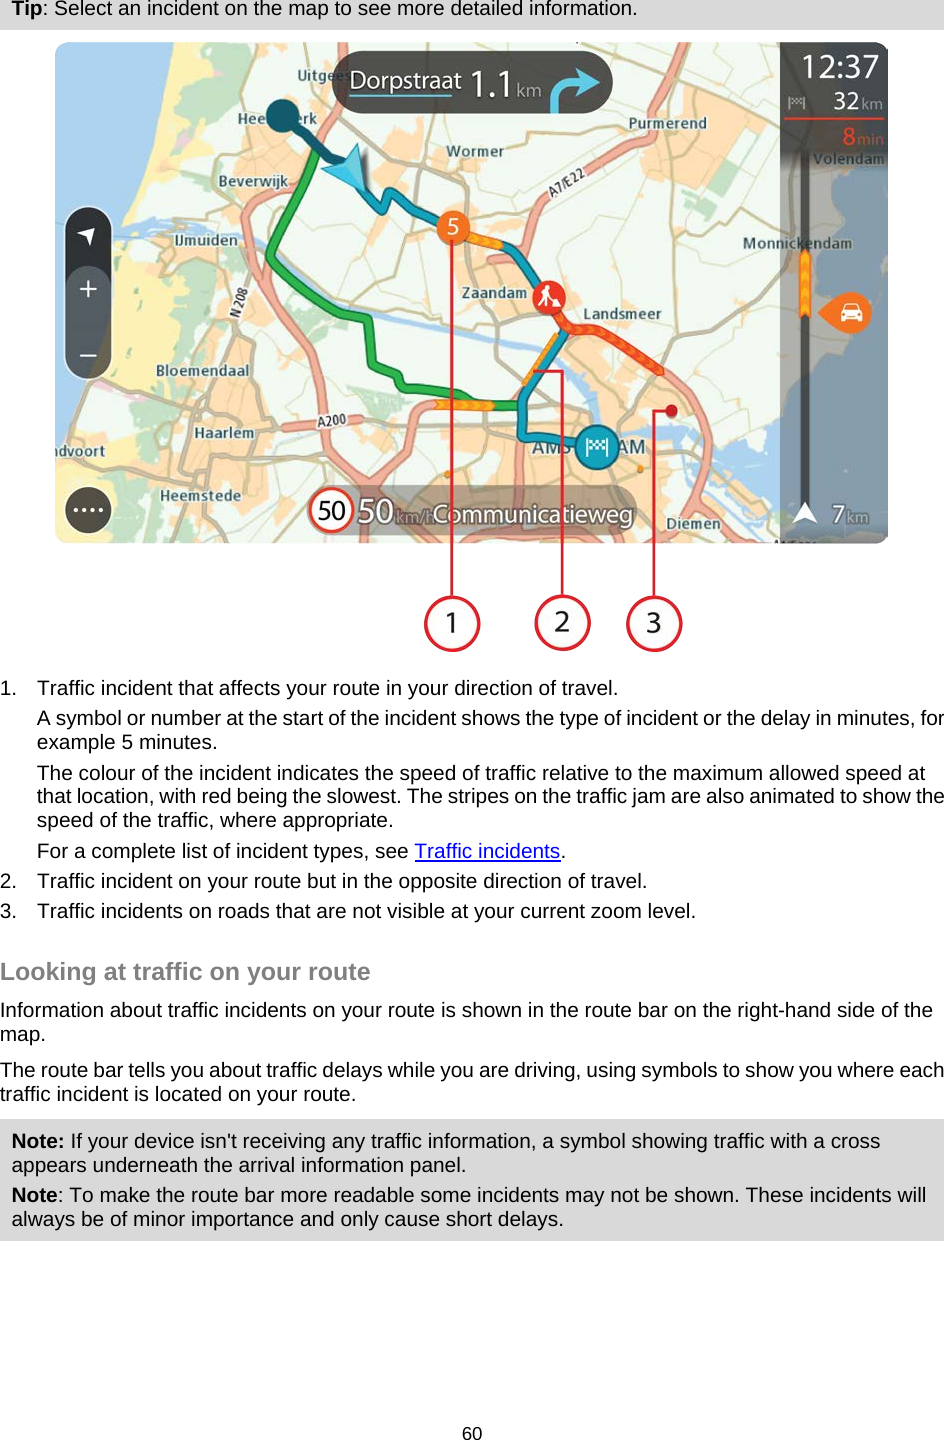  Tip: Select an incident on the map to see more detailed information.  1. Traffic incident that affects your route in your direction of travel. A symbol or number at the start of the incident shows the type of incident or the delay in minutes, for example 5 minutes.  The colour of the incident indicates the speed of traffic relative to the maximum allowed speed at that location, with red being the slowest. The stripes on the traffic jam are also animated to show the speed of the traffic, where appropriate.   For a complete list of incident types, see Traffic incidents. 2. Traffic incident on your route but in the opposite direction of travel. 3. Traffic incidents on roads that are not visible at your current zoom level.  Looking at traffic on your route Information about traffic incidents on your route is shown in the route bar on the right-hand side of the map. The route bar tells you about traffic delays while you are driving, using symbols to show you where each traffic incident is located on your route. Note: If your device isn&apos;t receiving any traffic information, a symbol showing traffic with a cross appears underneath the arrival information panel. Note: To make the route bar more readable some incidents may not be shown. These incidents will always be of minor importance and only cause short delays. 60   